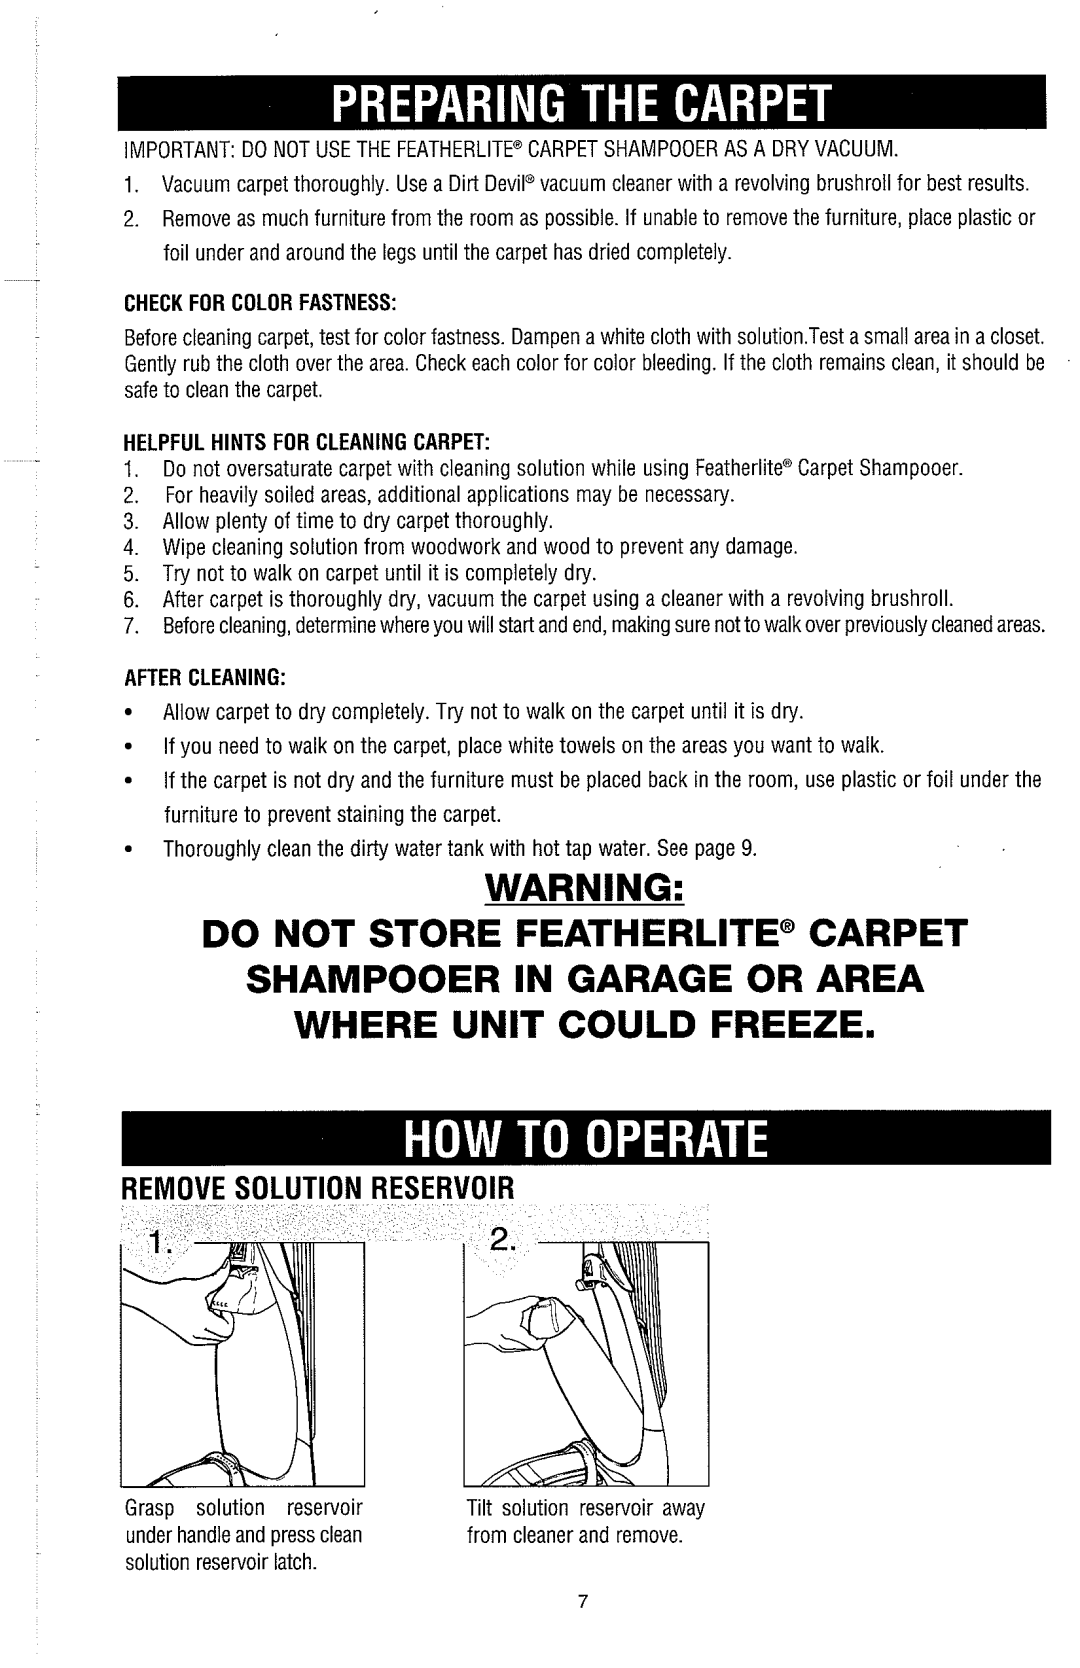 Dirt Devil Carpet Shampooer owner manual Checkforcolorfastness, Helpful Hints For Cleaning Carpet, After Cleaning 